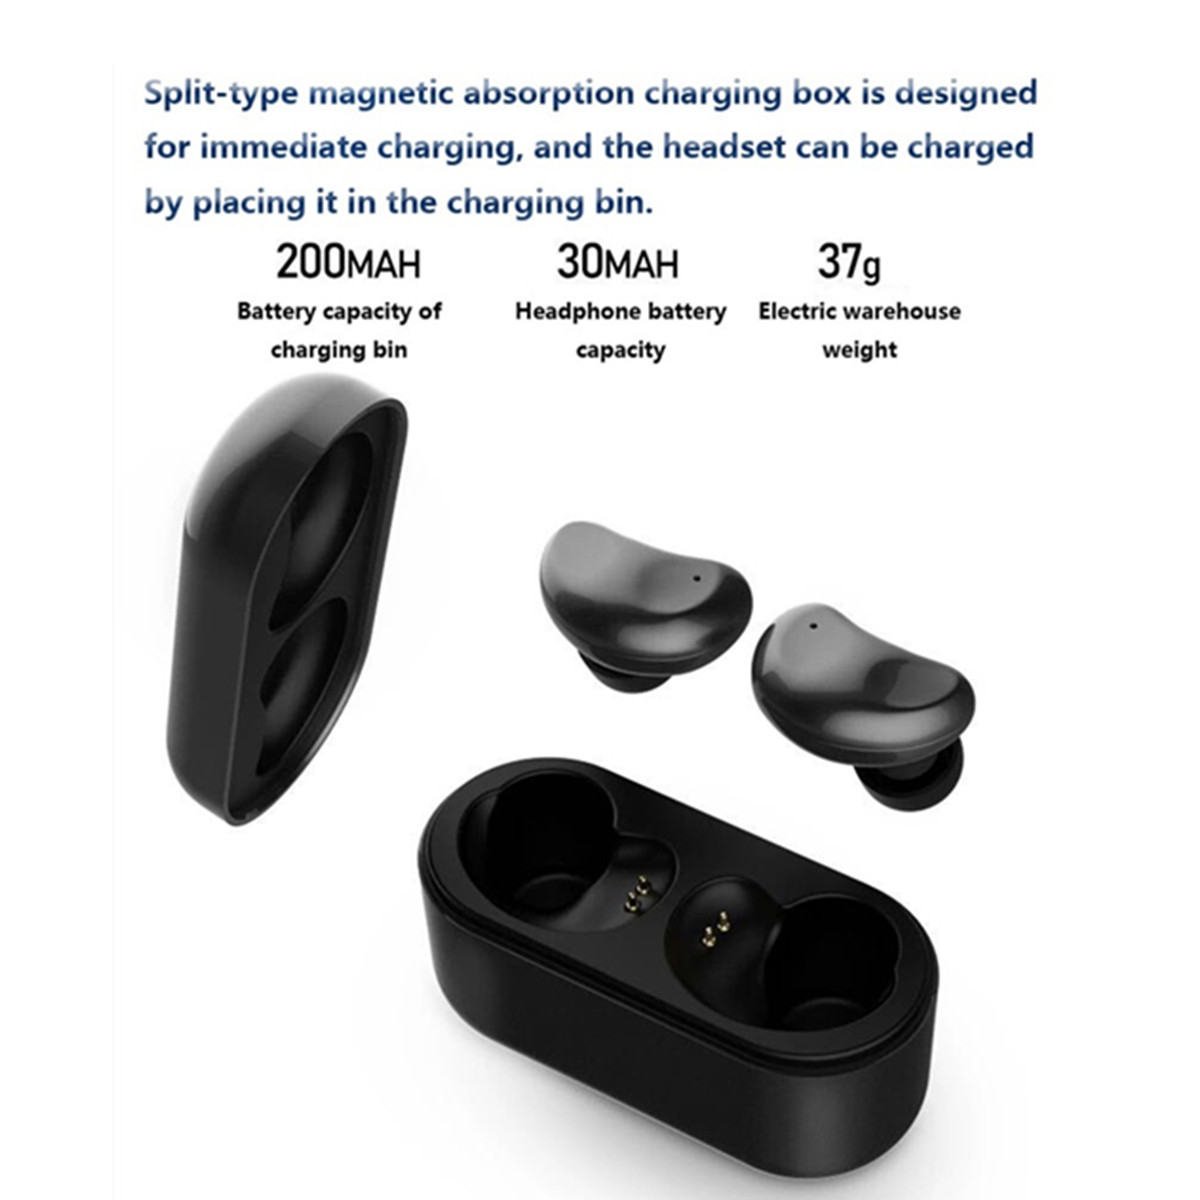 REMAX-TWS-5-bluetooth-50-Stereo-True-Wireless-Earbuds-Touch-Music-Handsfree-Earphone-With-HD-Mic-1459655-7